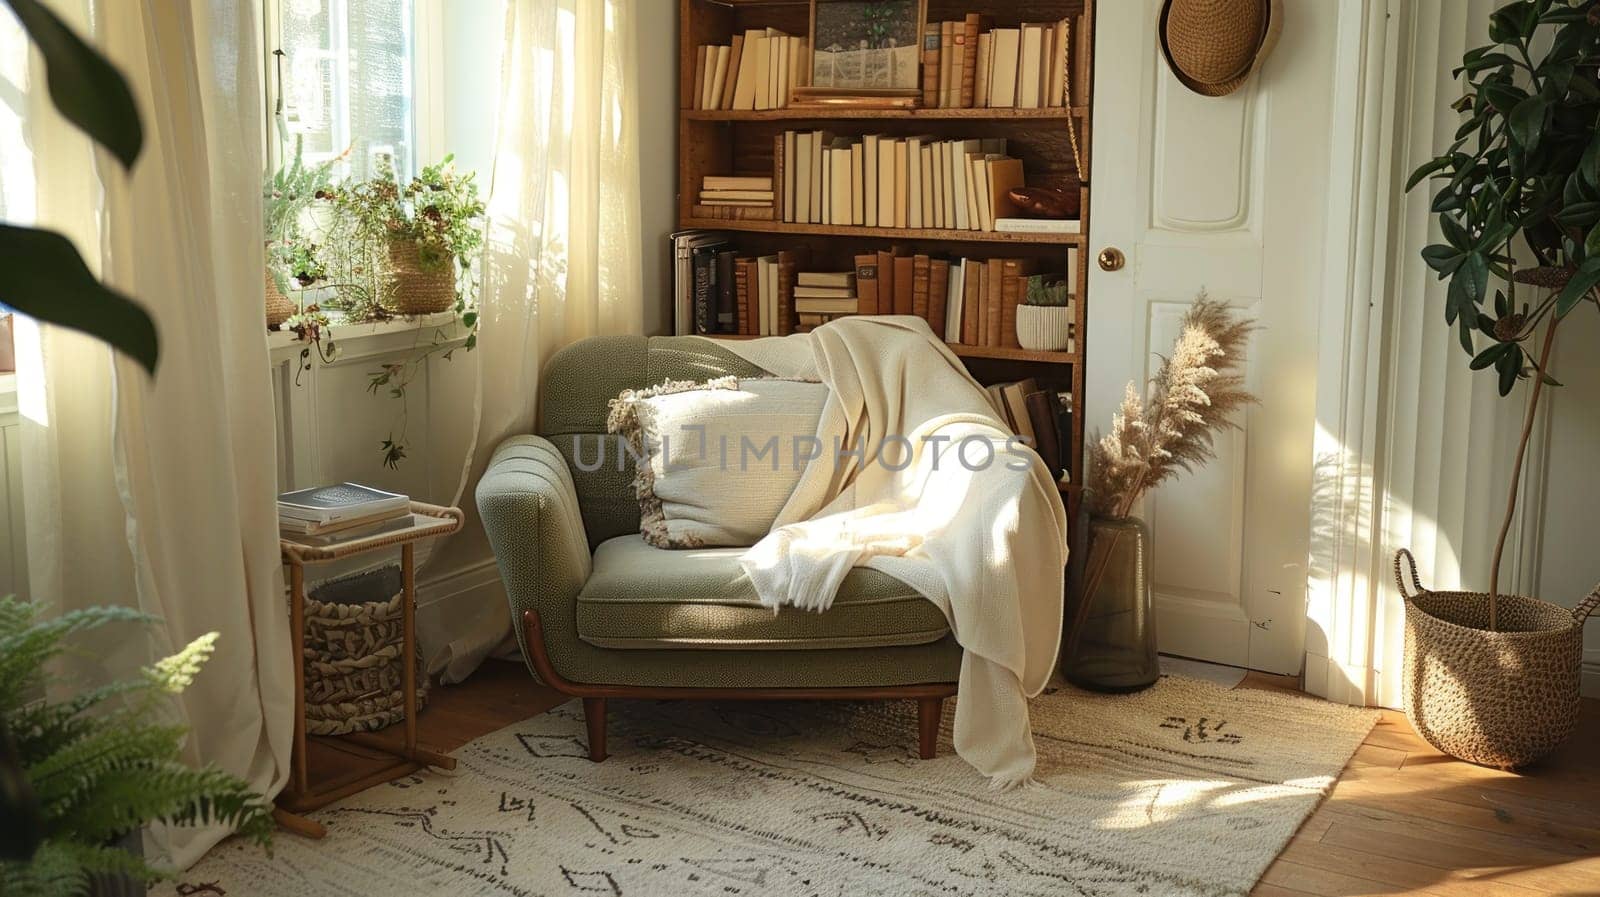 Cozy Reading Nook with Muted Colors Concept Light Olive Armchair Soft Cream Throw and Beige Rug for Harmonious and Cohesive Look.